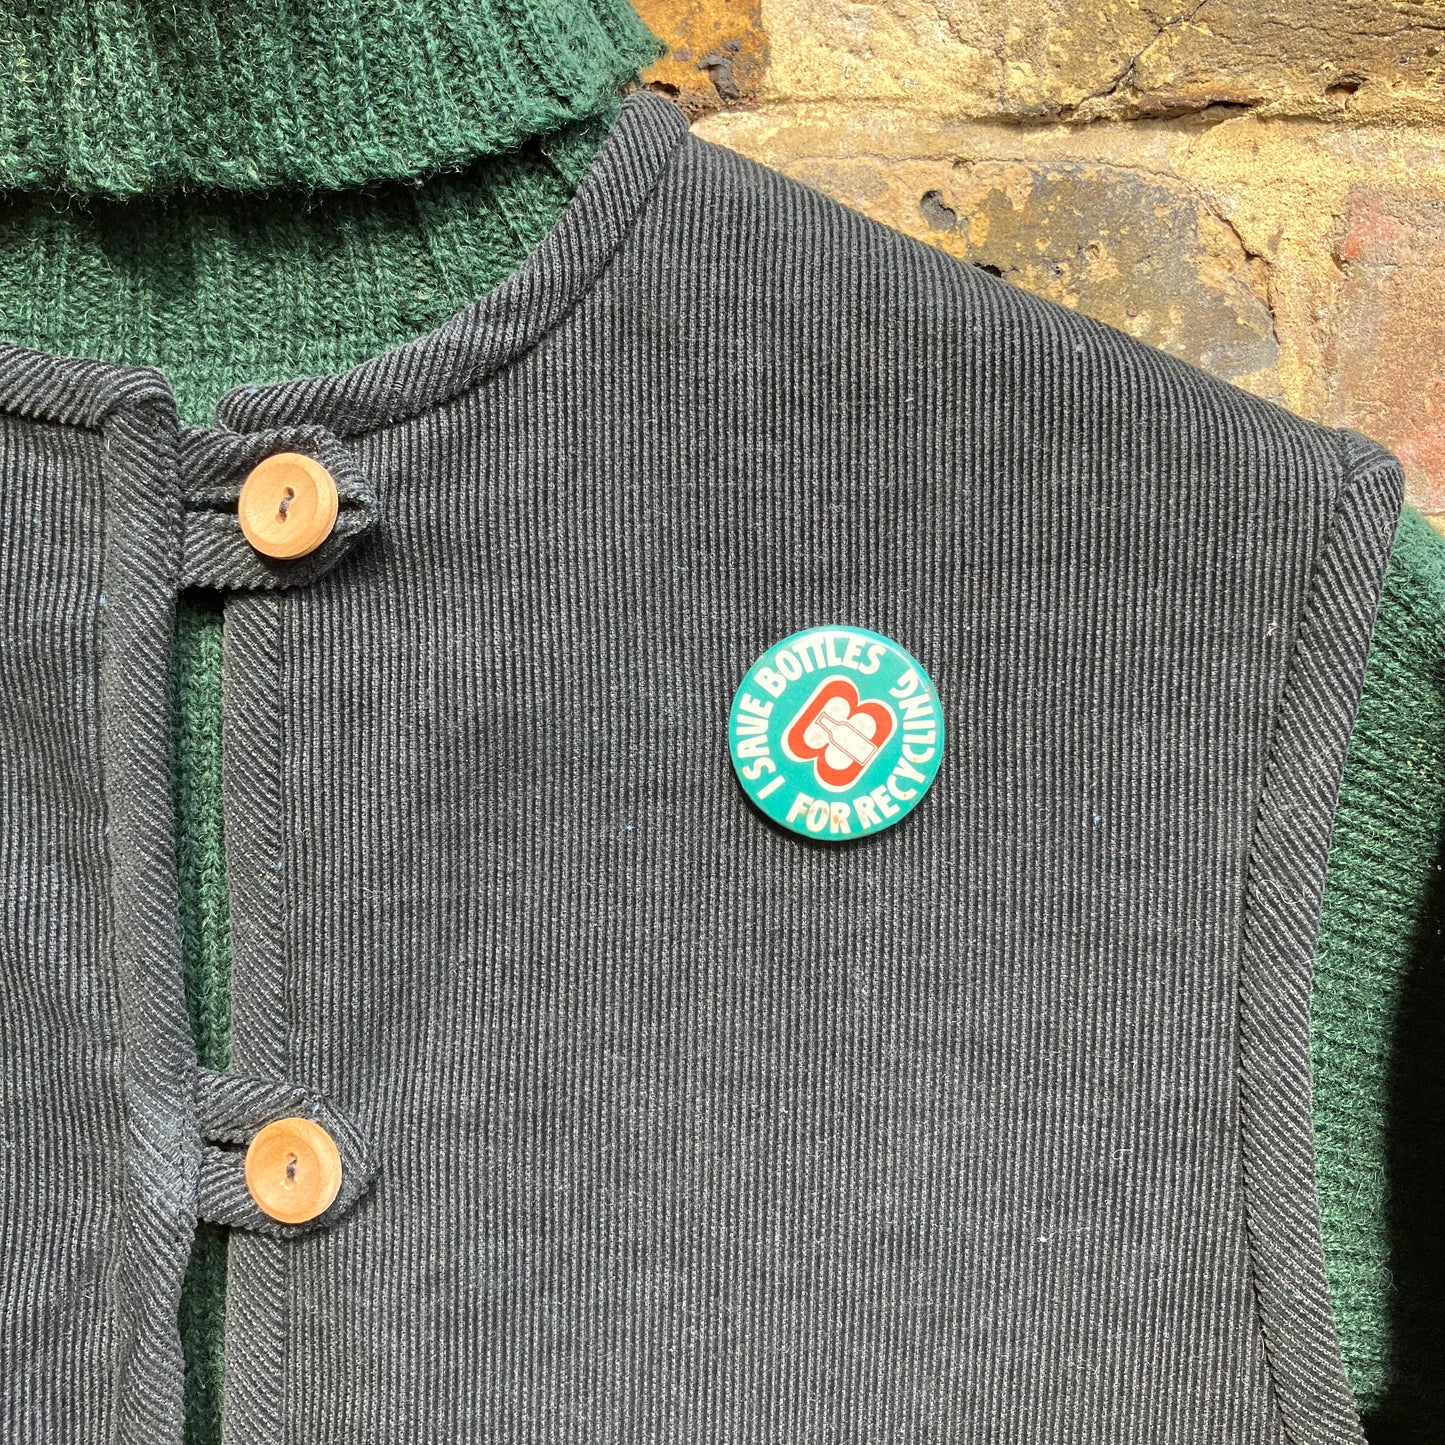 Needlecord vest/gilet/waistcoat with large hand quilted patchwork pockets in gold and silver lamé with blue binding.  Finished with wooden buttons and a hanging loop. Pictured hanging against a wall with a vintage badge pinned to it that reads 'I save bottles for recycling'